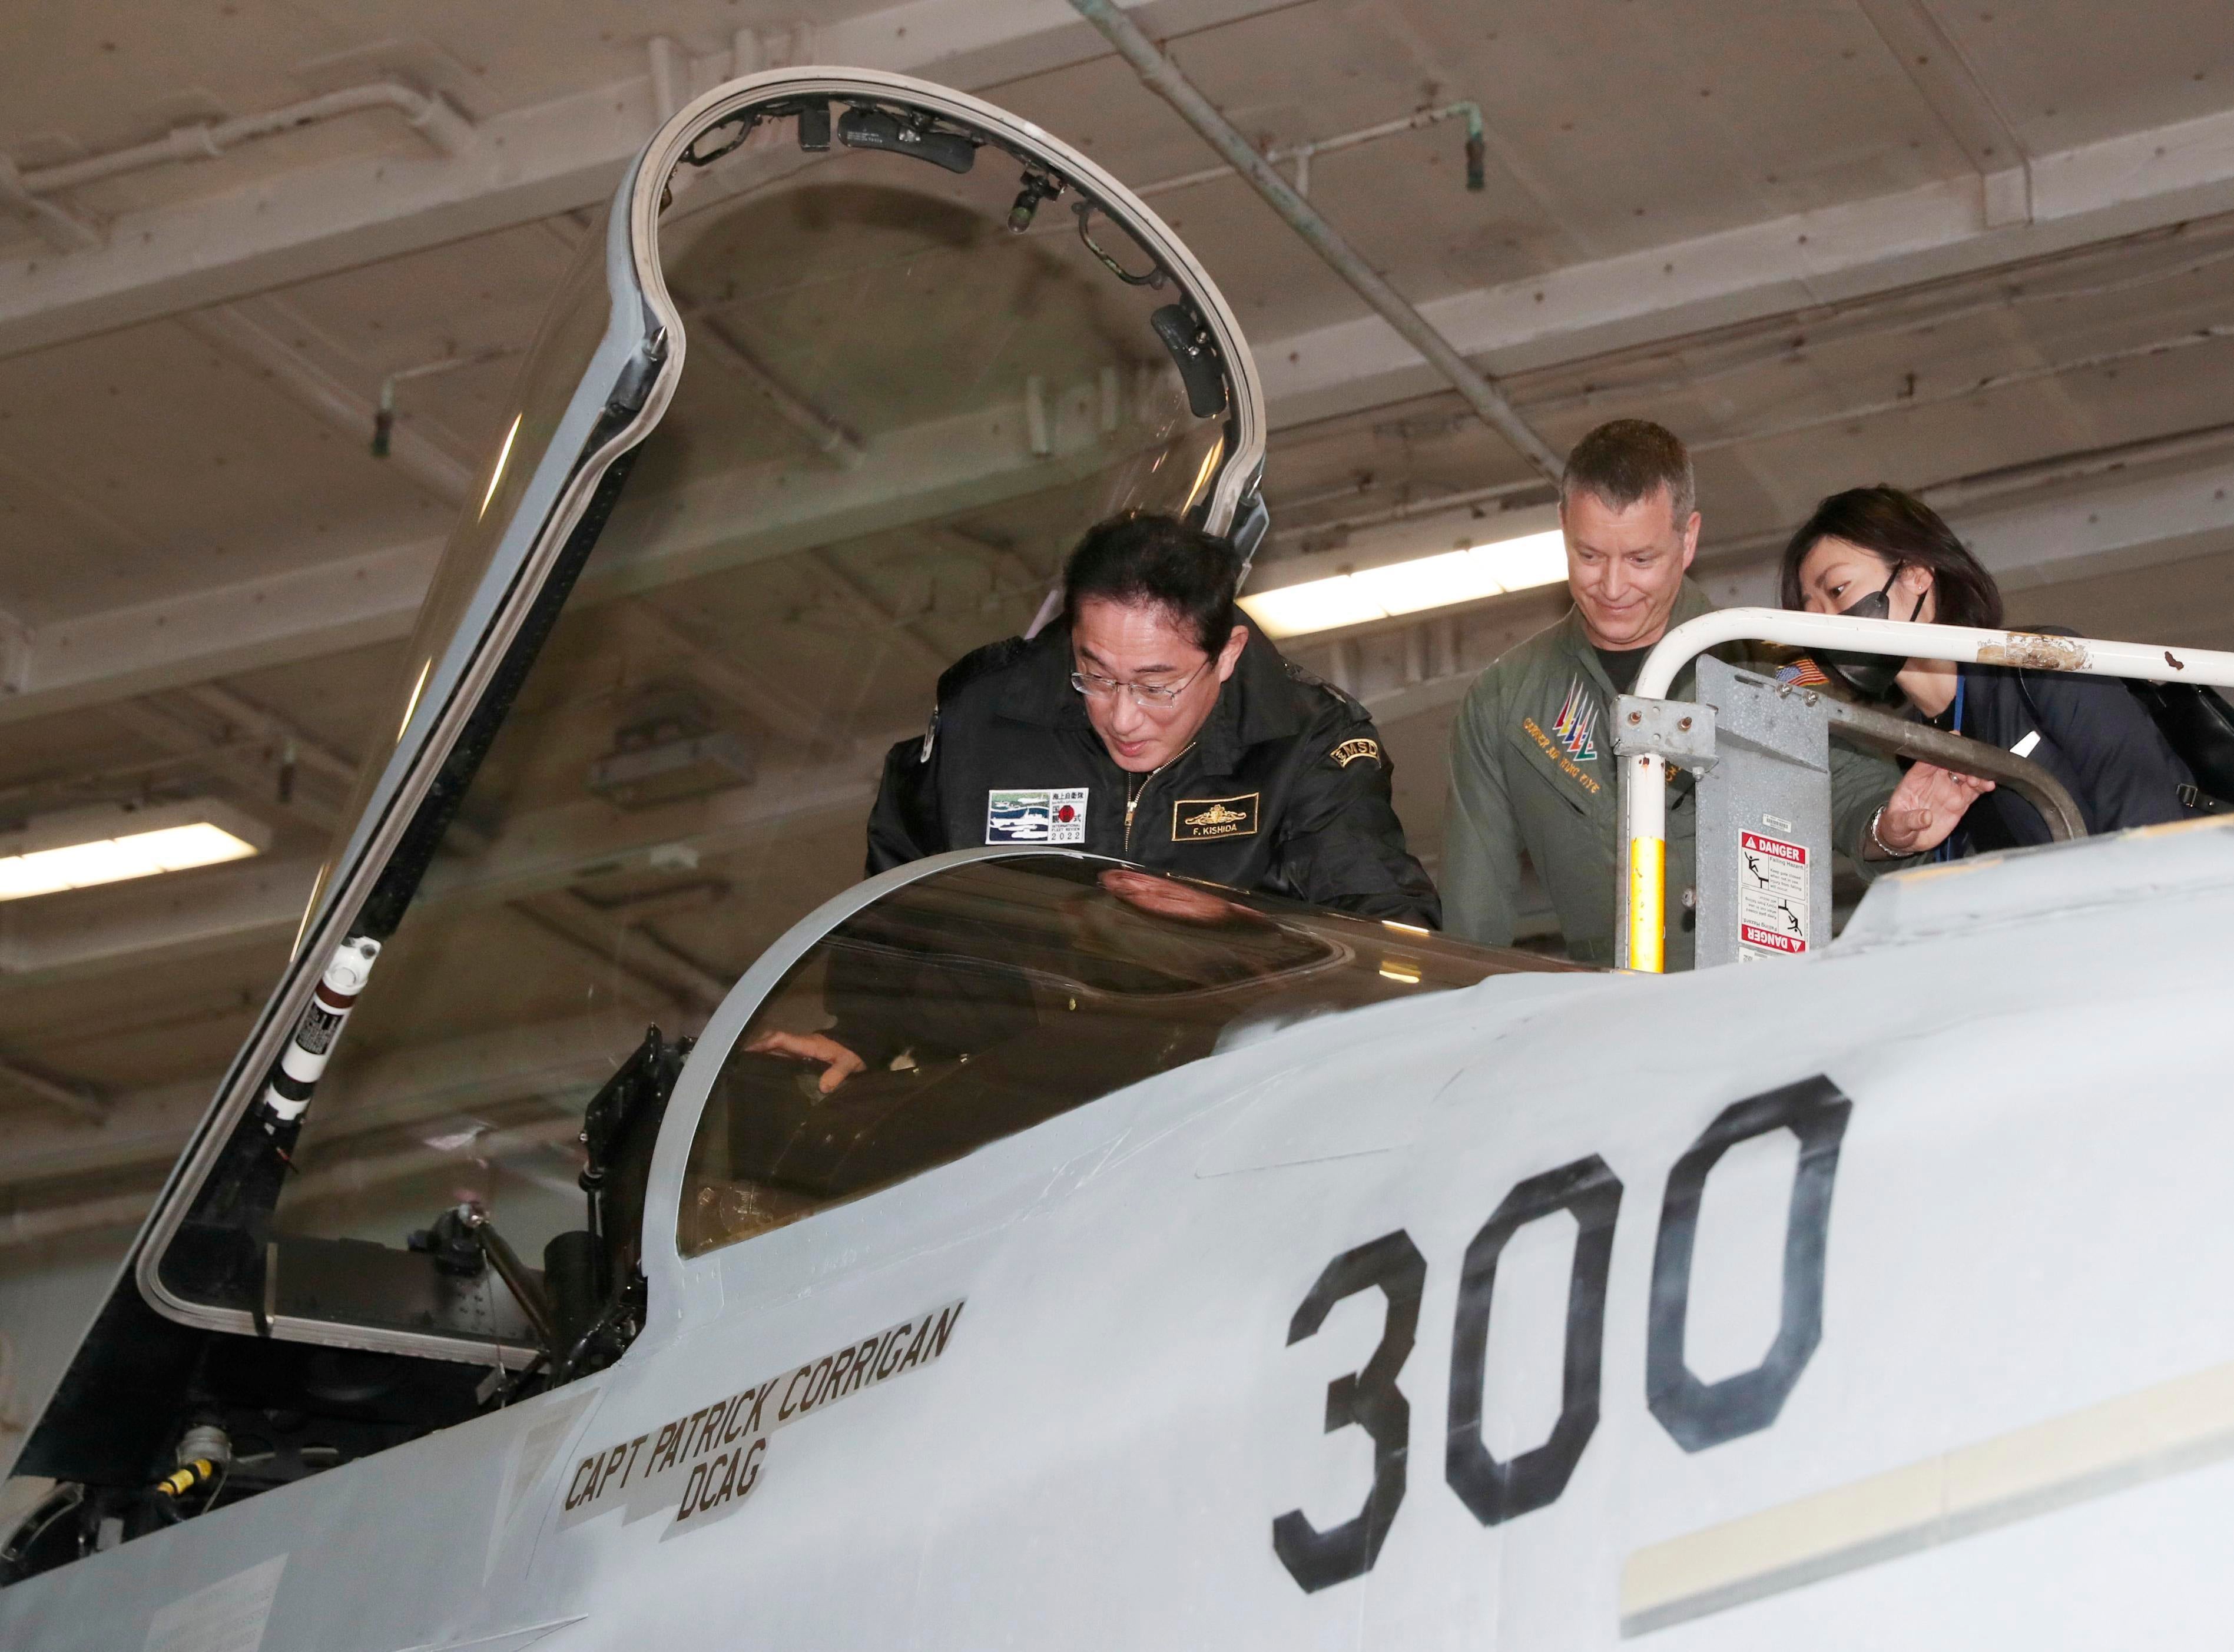 Japanese PM Fumio Kishida pictured visiting a US fighter jet in Tokyo on 6 November